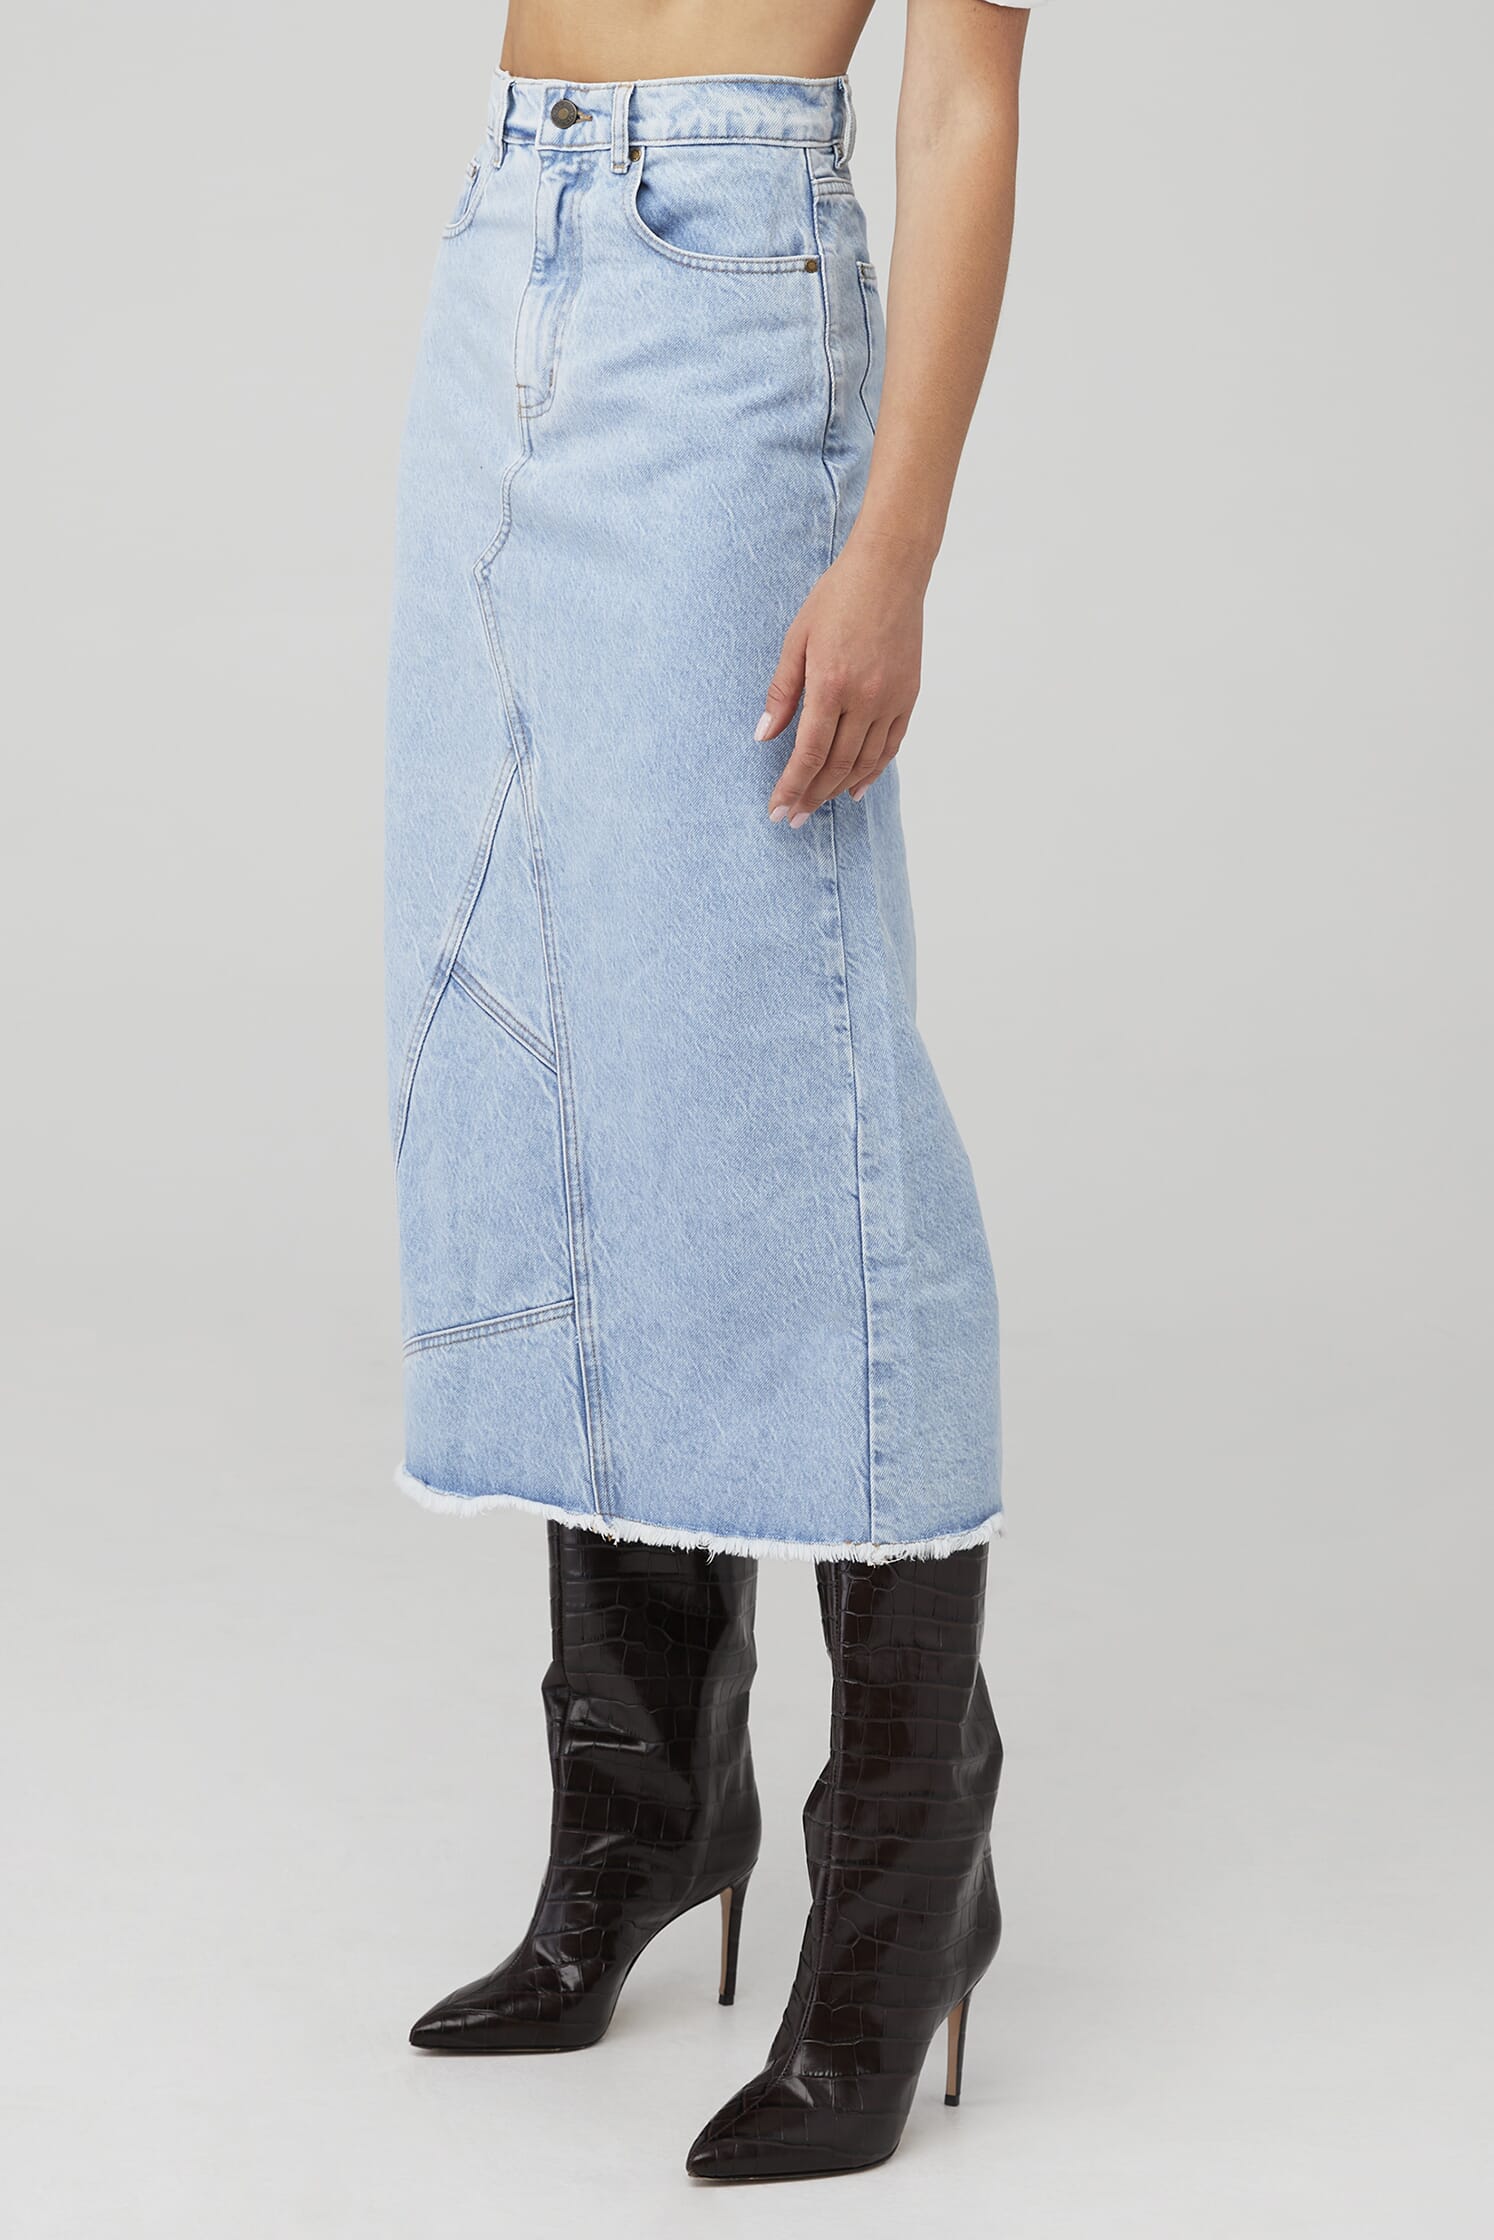 Spell | Eve Denim Skirt in Sun Washed Blue| FashionPass